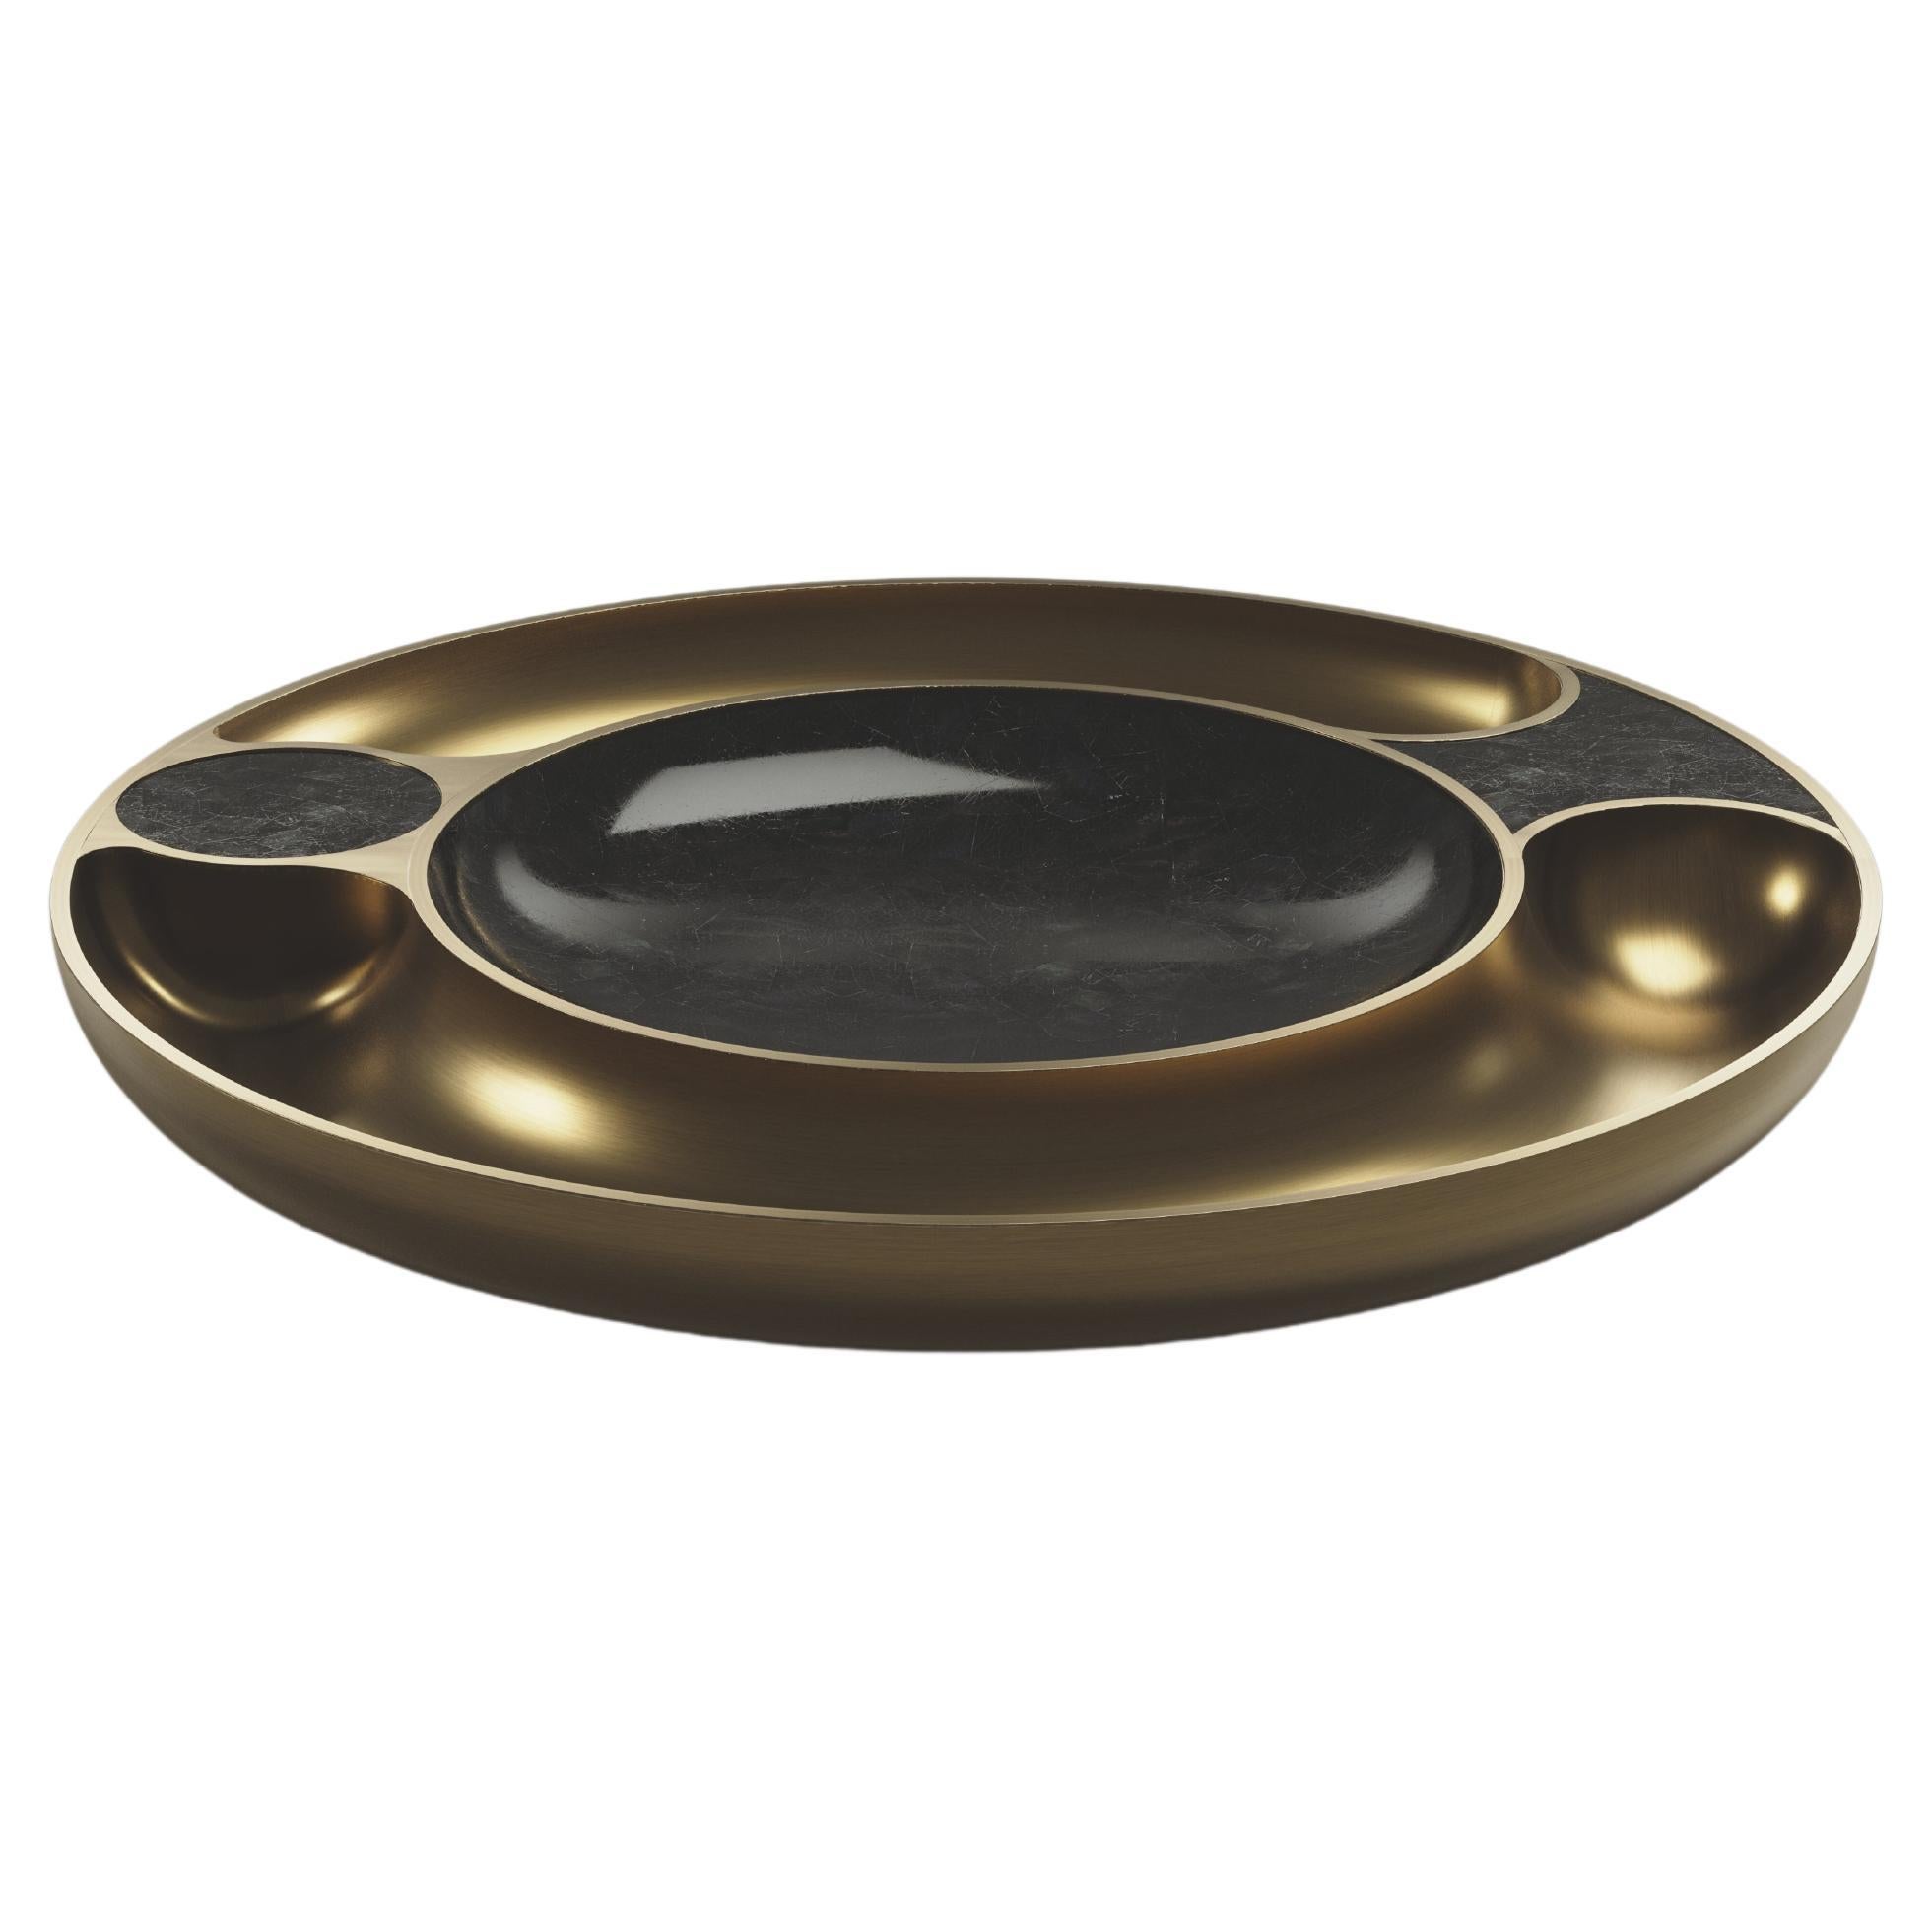 Iris Bowl in Black Pen Shell with Bronze-Patina Brass by R&Y Augousti